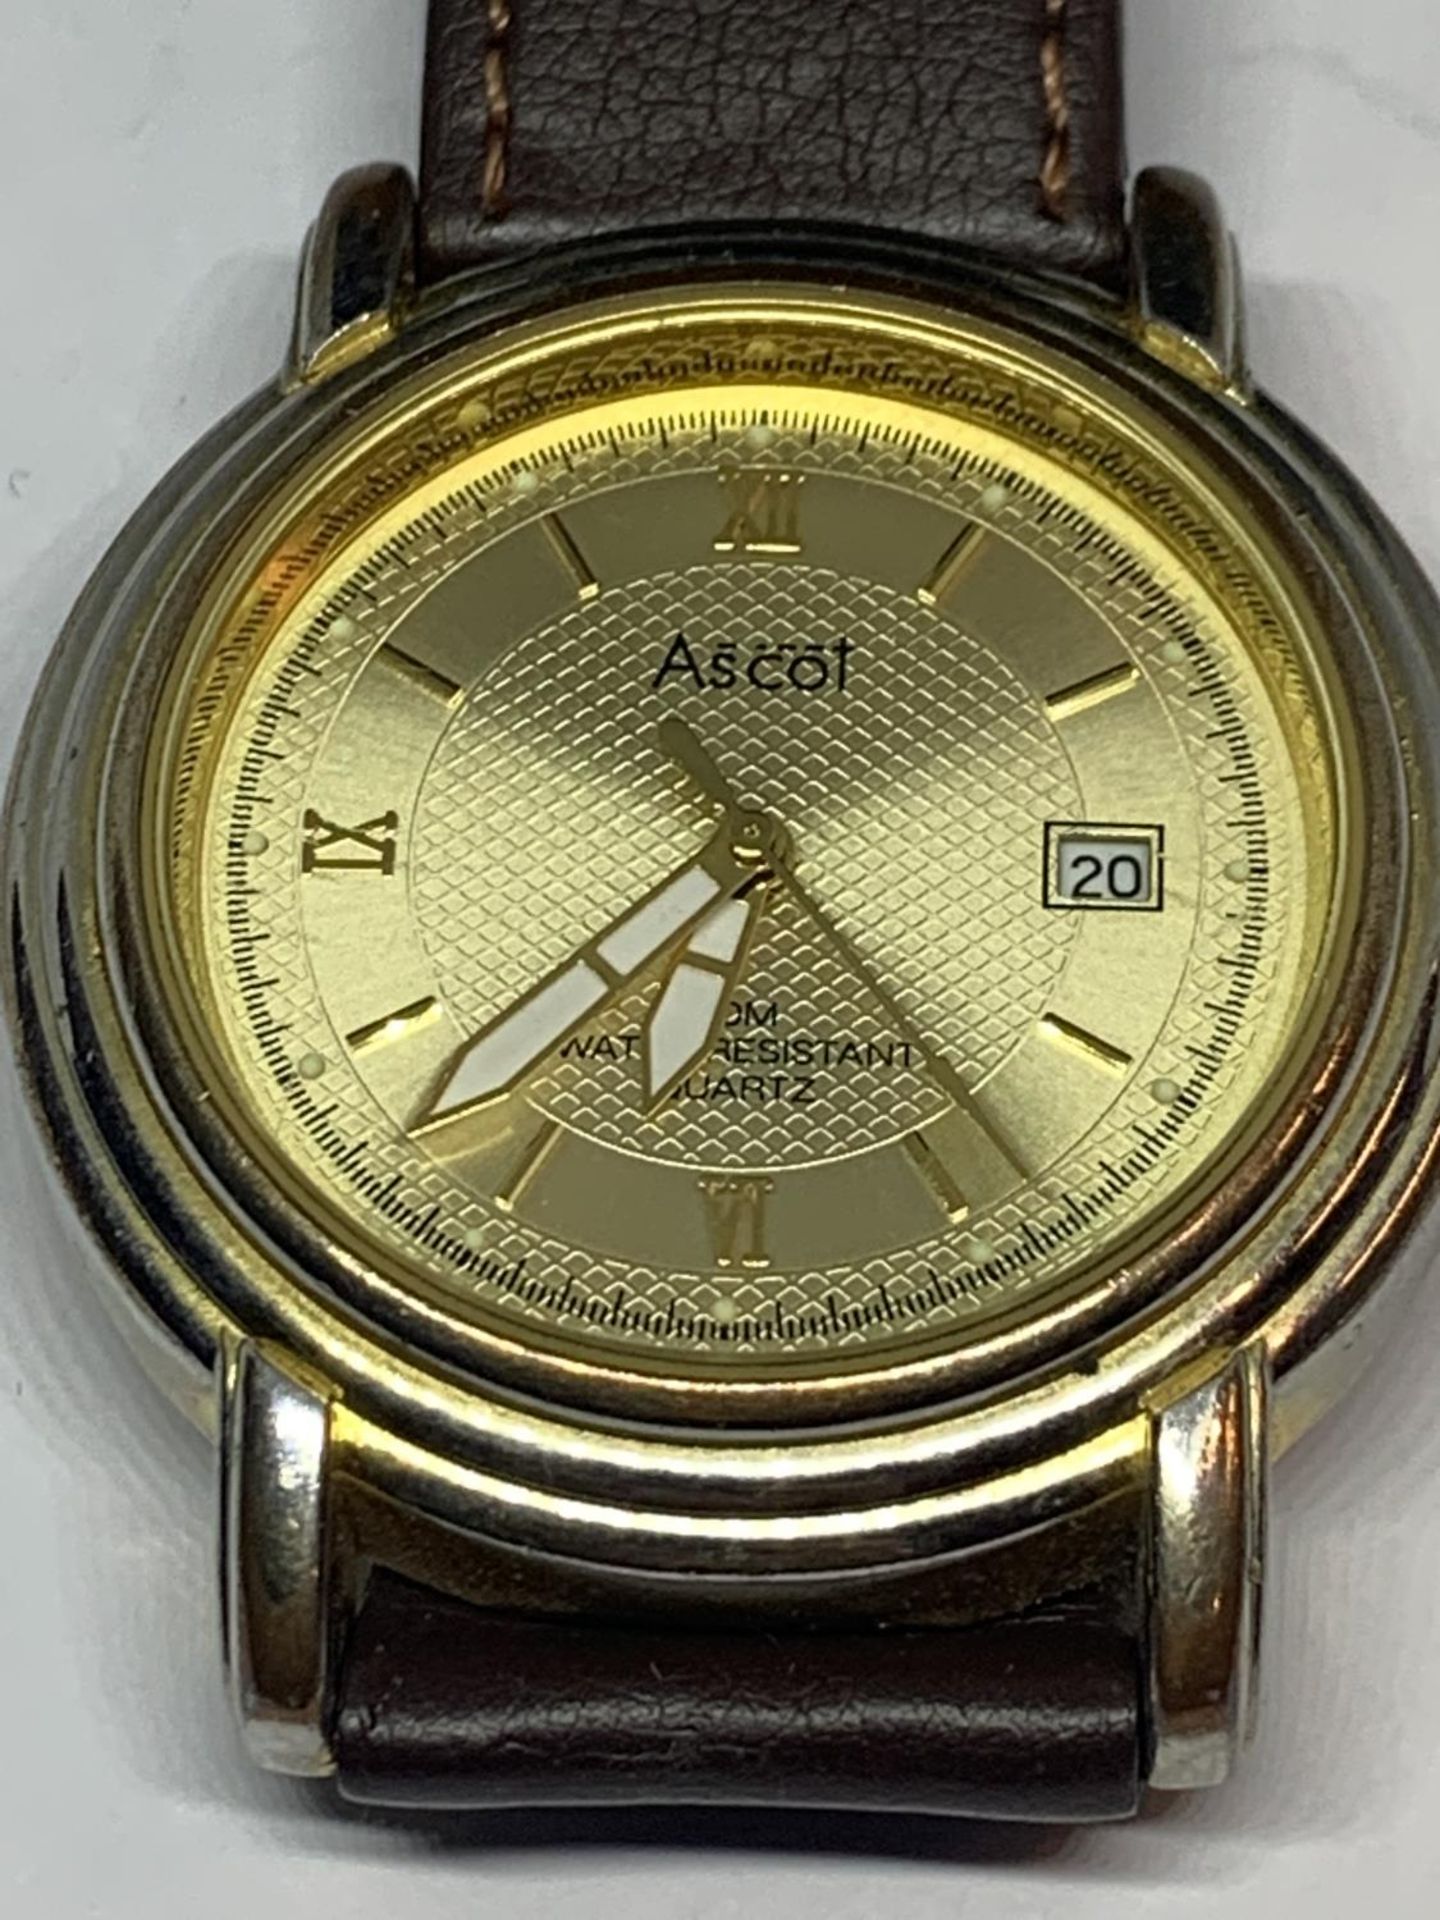 AN ASCOT CALENDAR WRIST WATCH WITH BROWN LEATHER STRAP SEEN WORKING BUT NO WARRANTY - Image 2 of 3